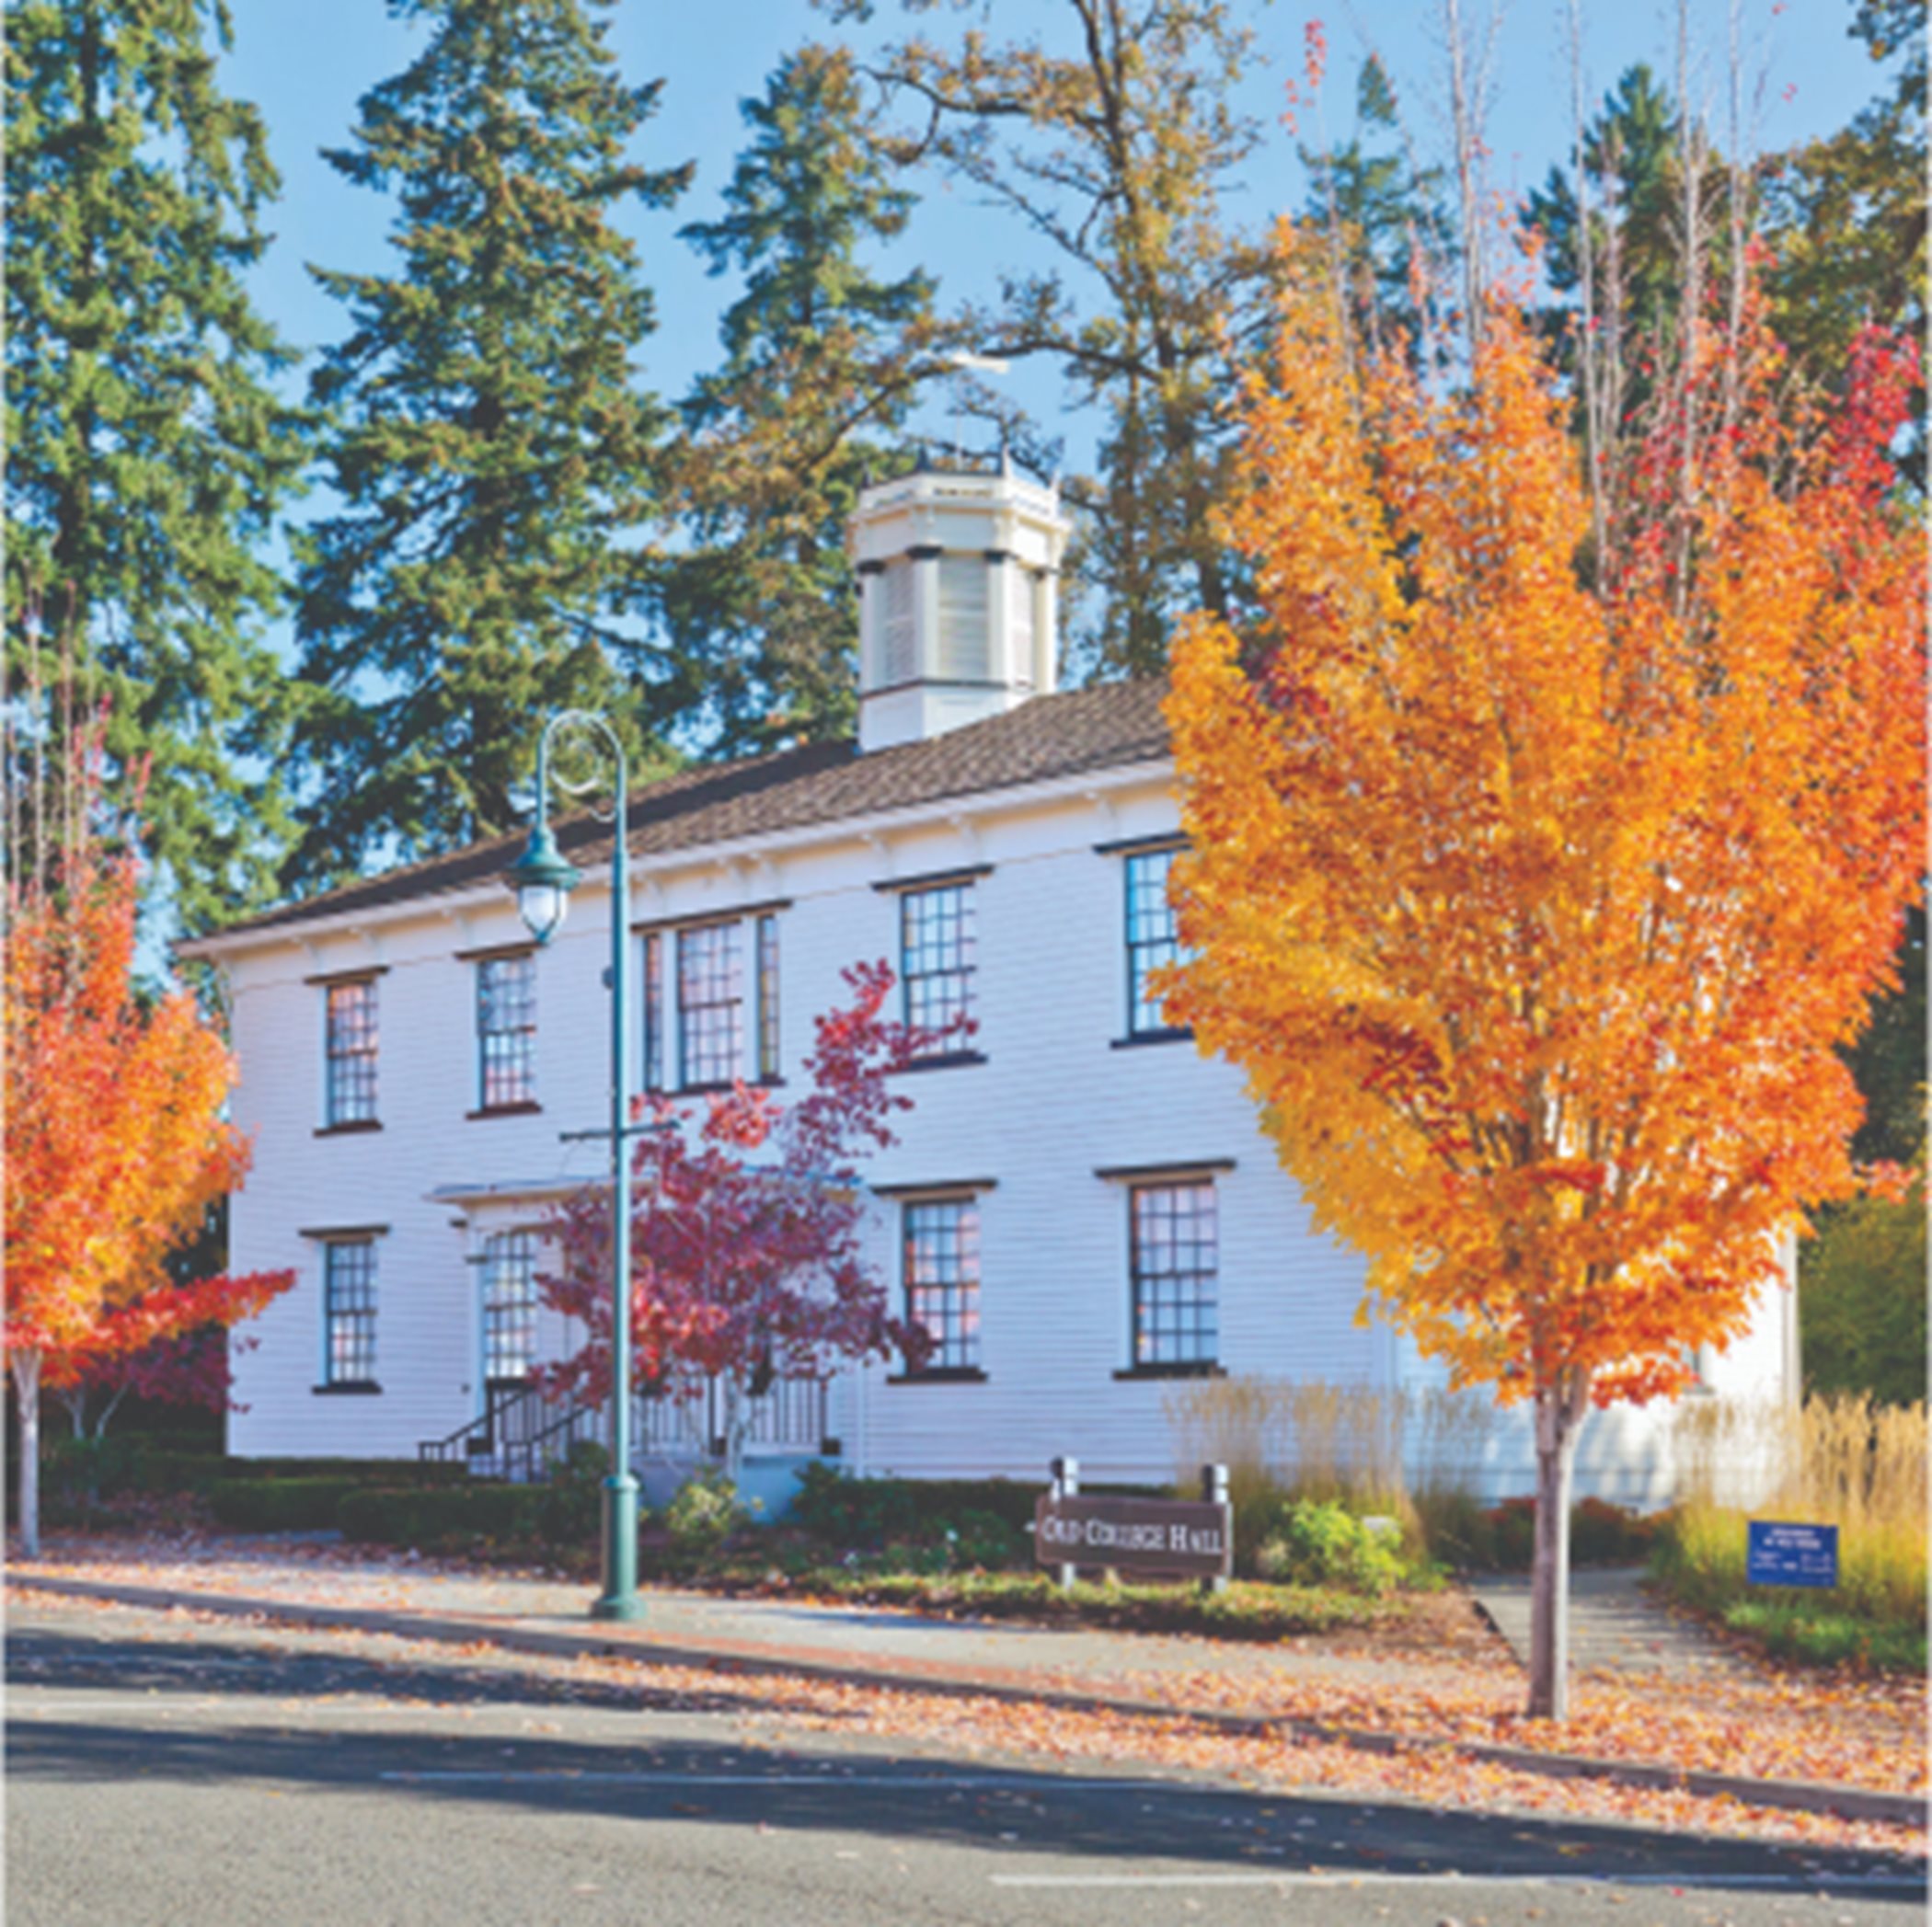 Pacific University’s Old College Hall campus